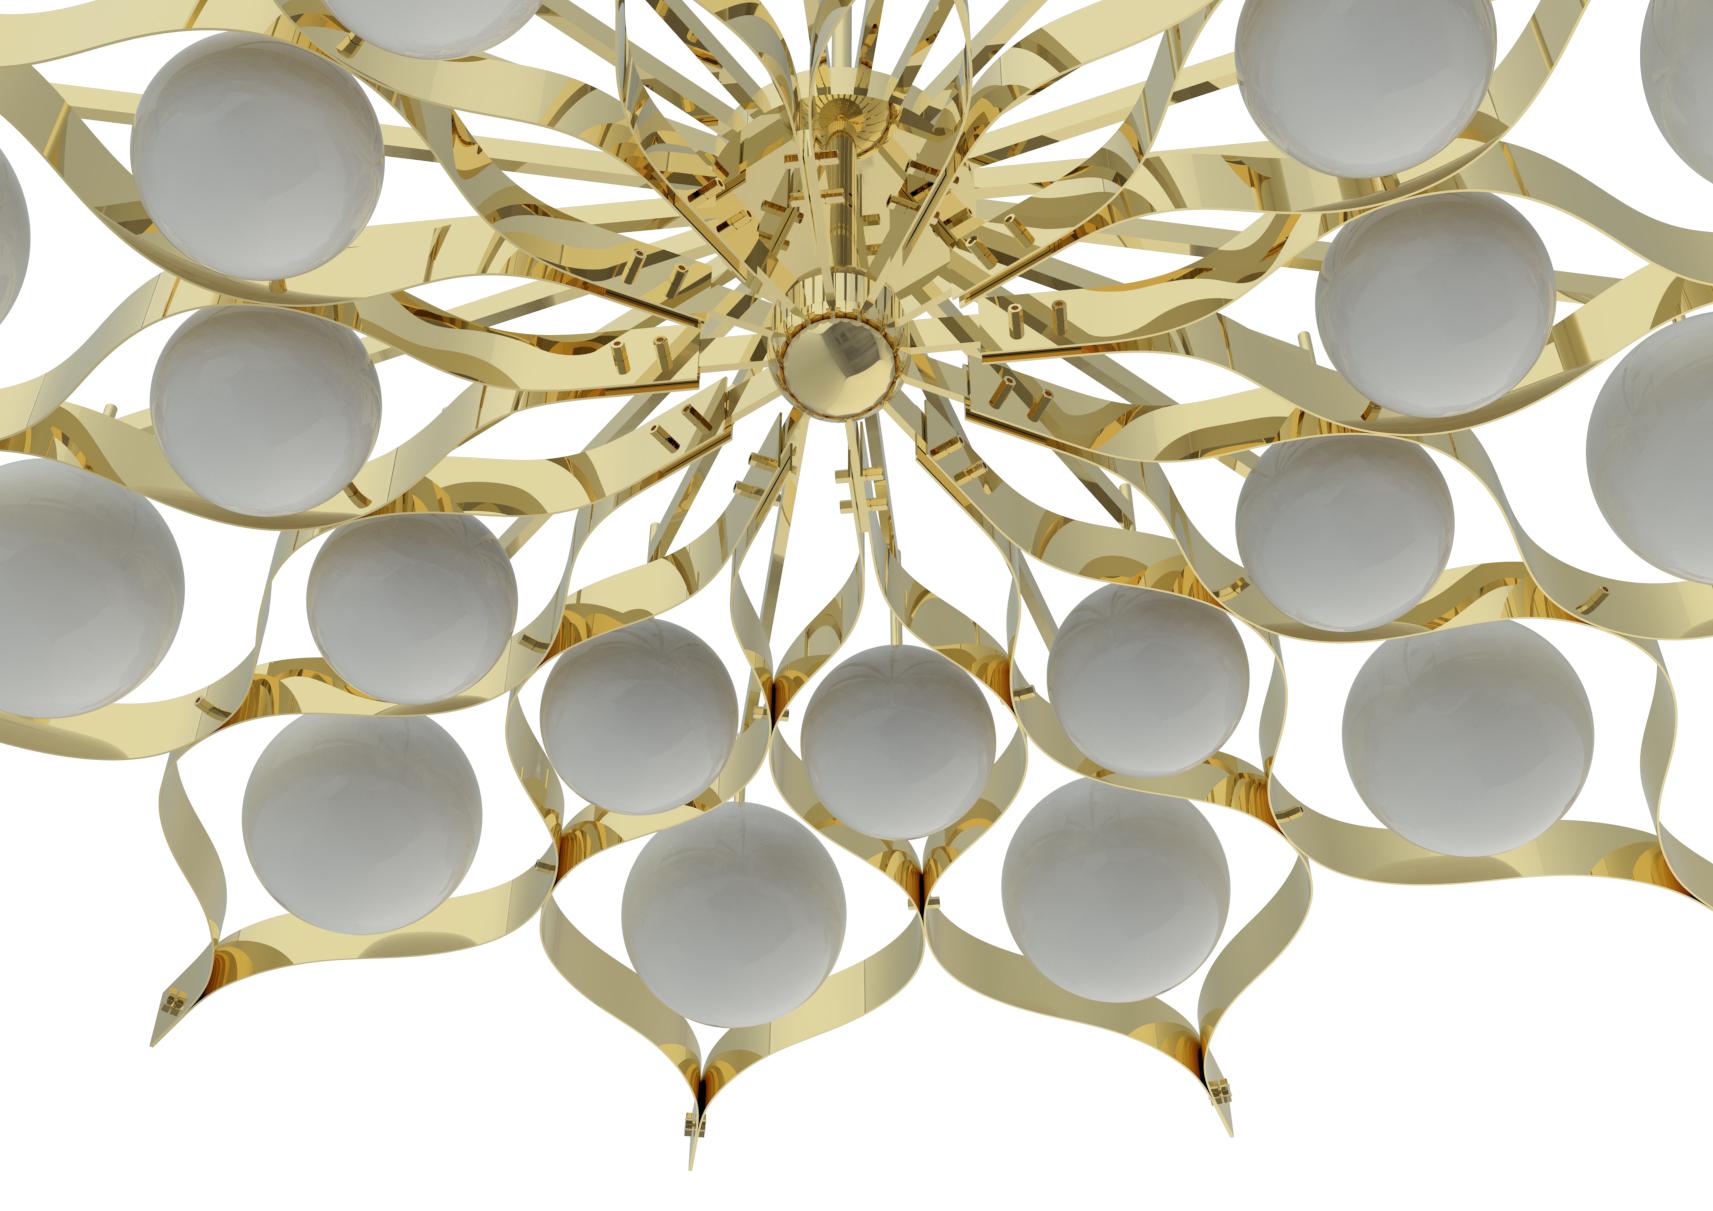 21st Century Pavone Large Pendant Lamp, DALI, Gio Ponti, 2019, Italy In New Condition For Sale In Milano, Lombardia